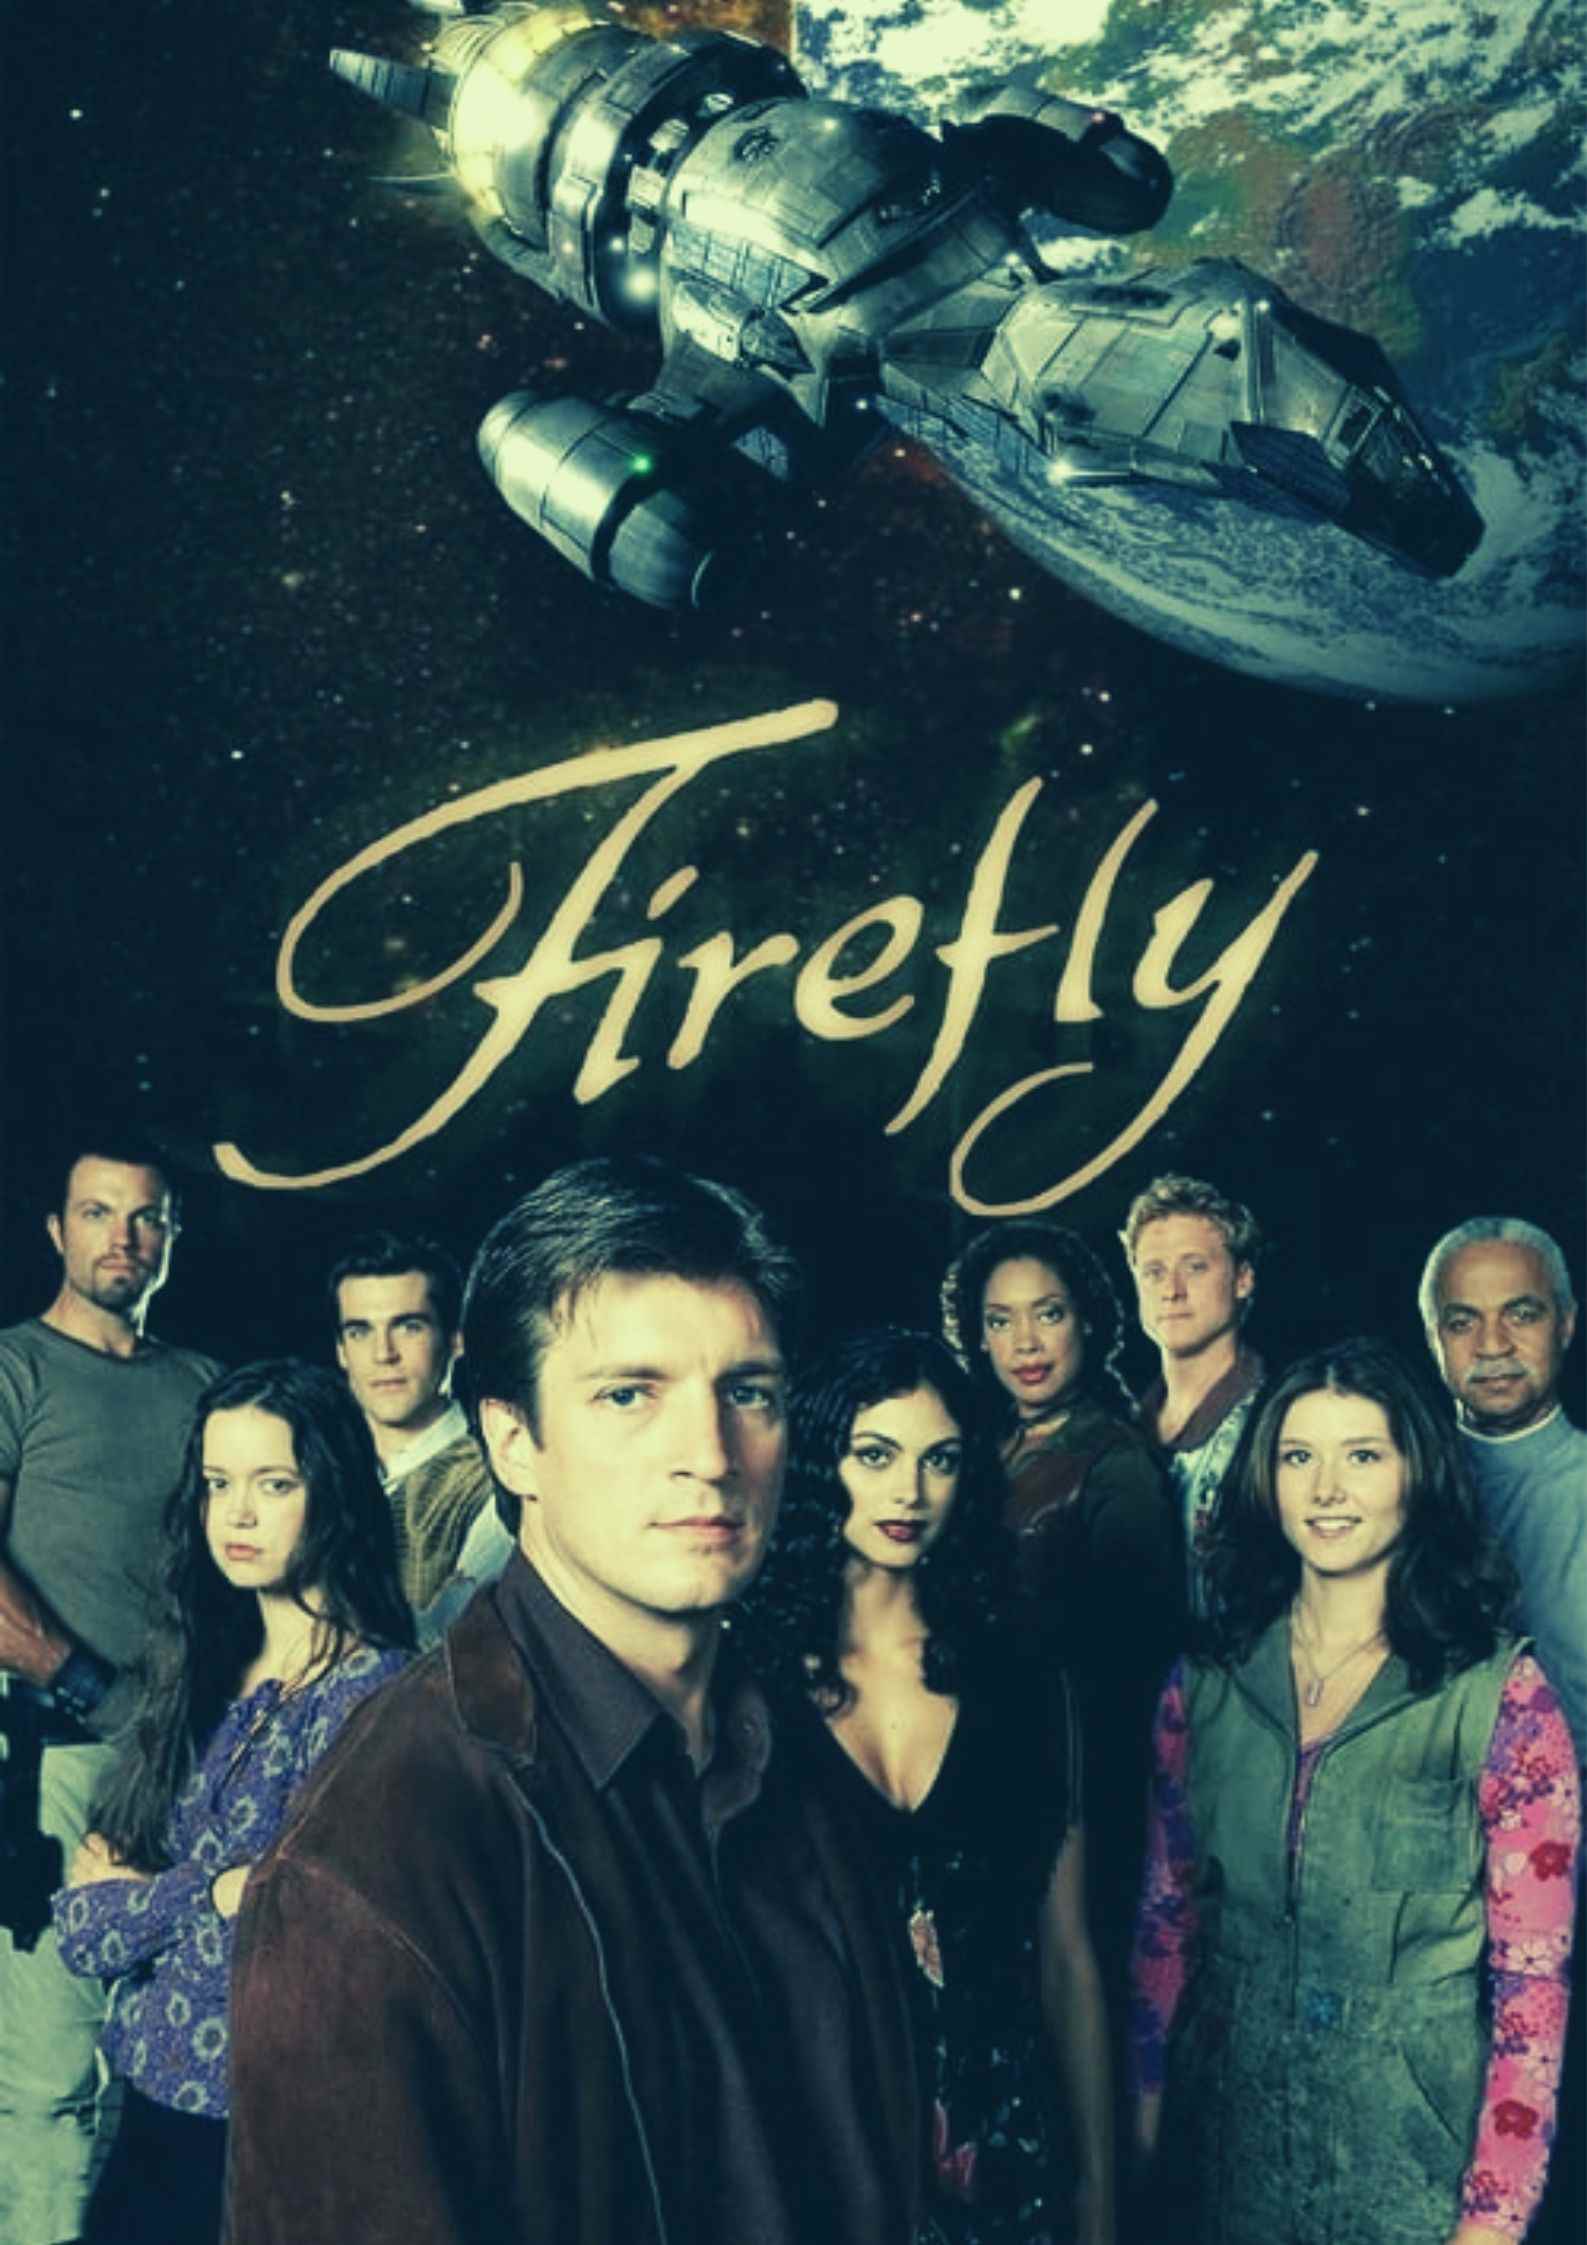 Firefly Parents Guide | Firefly Age Rating (2002)